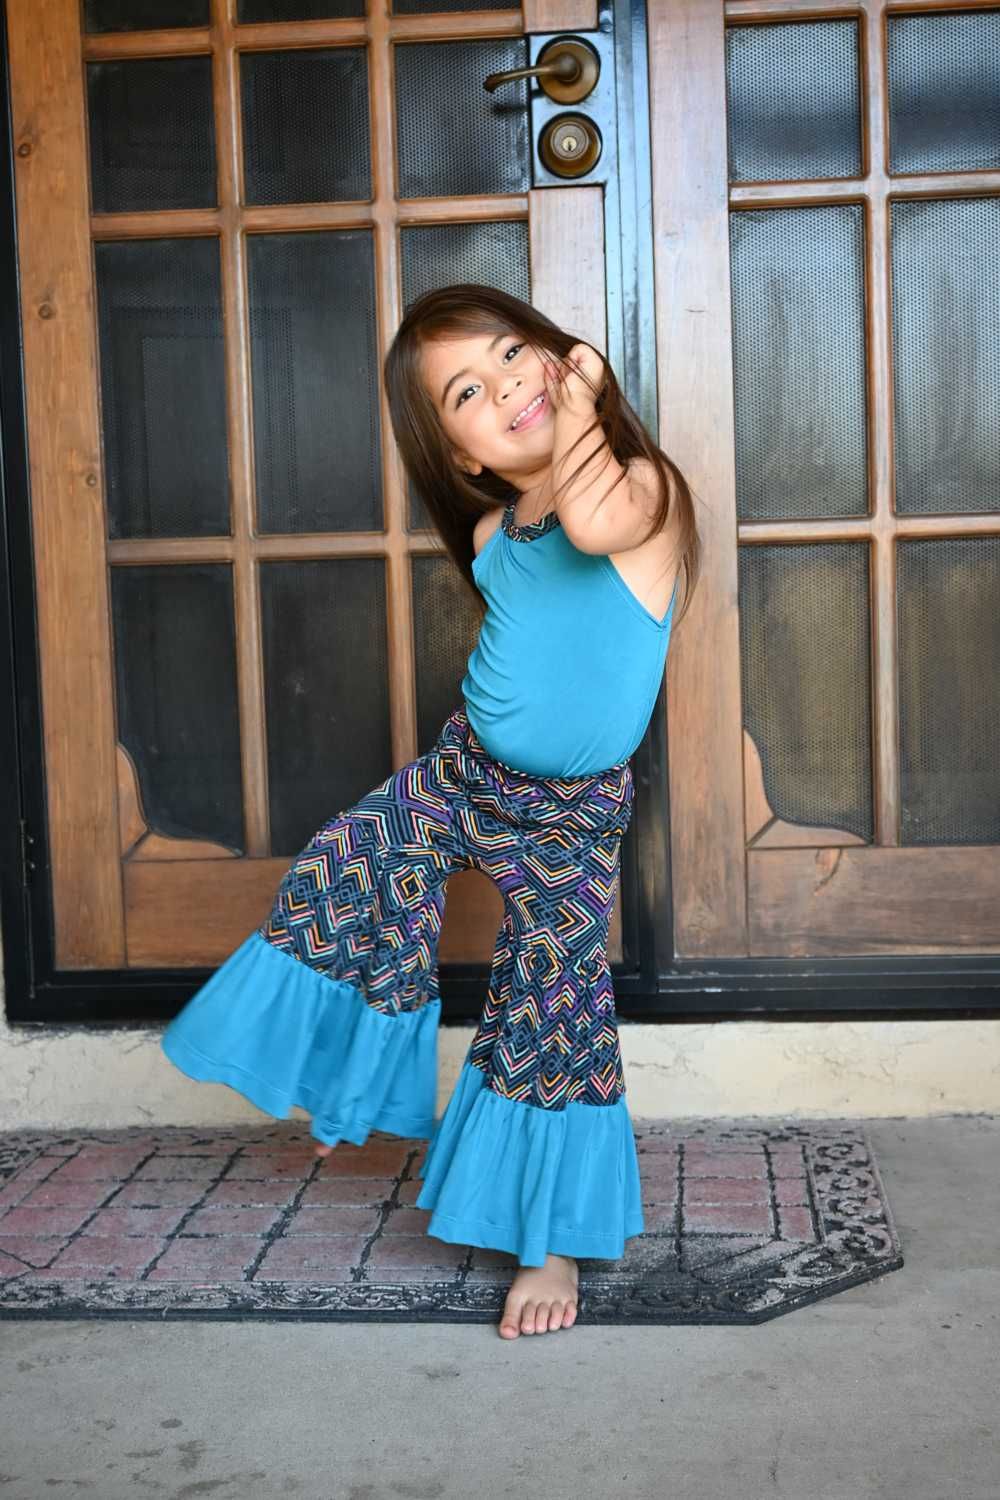 Tulum's Tiered Pants Sizes 2T to 14 Kids and Dolls PDF Pattern